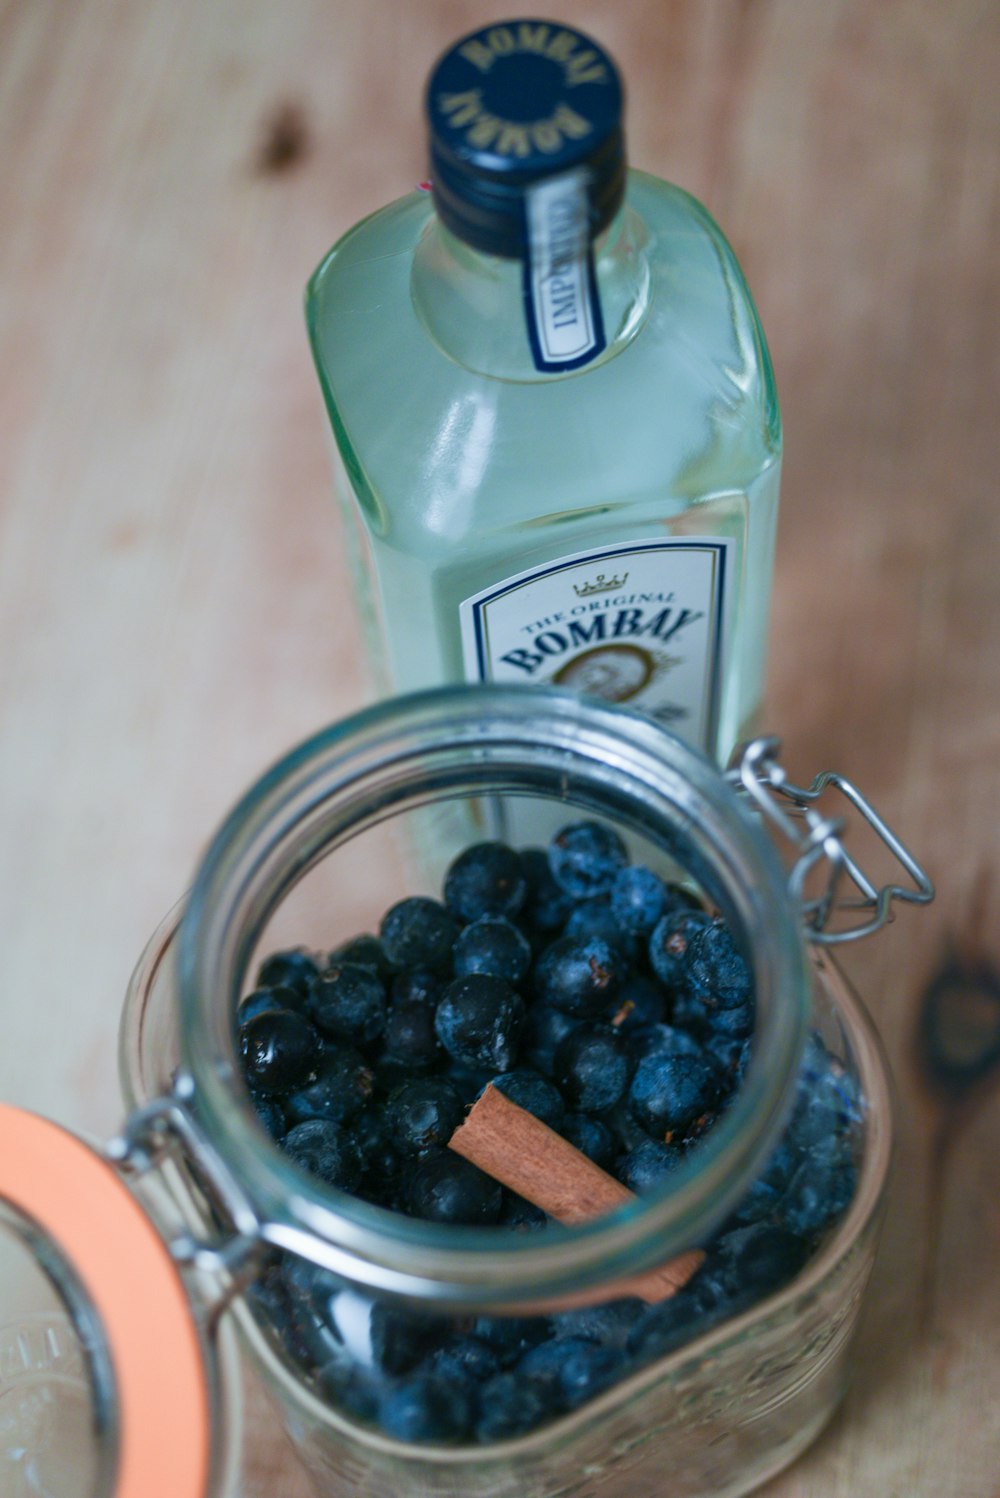 a glass jar filled with blueberries next to a bottle of gin